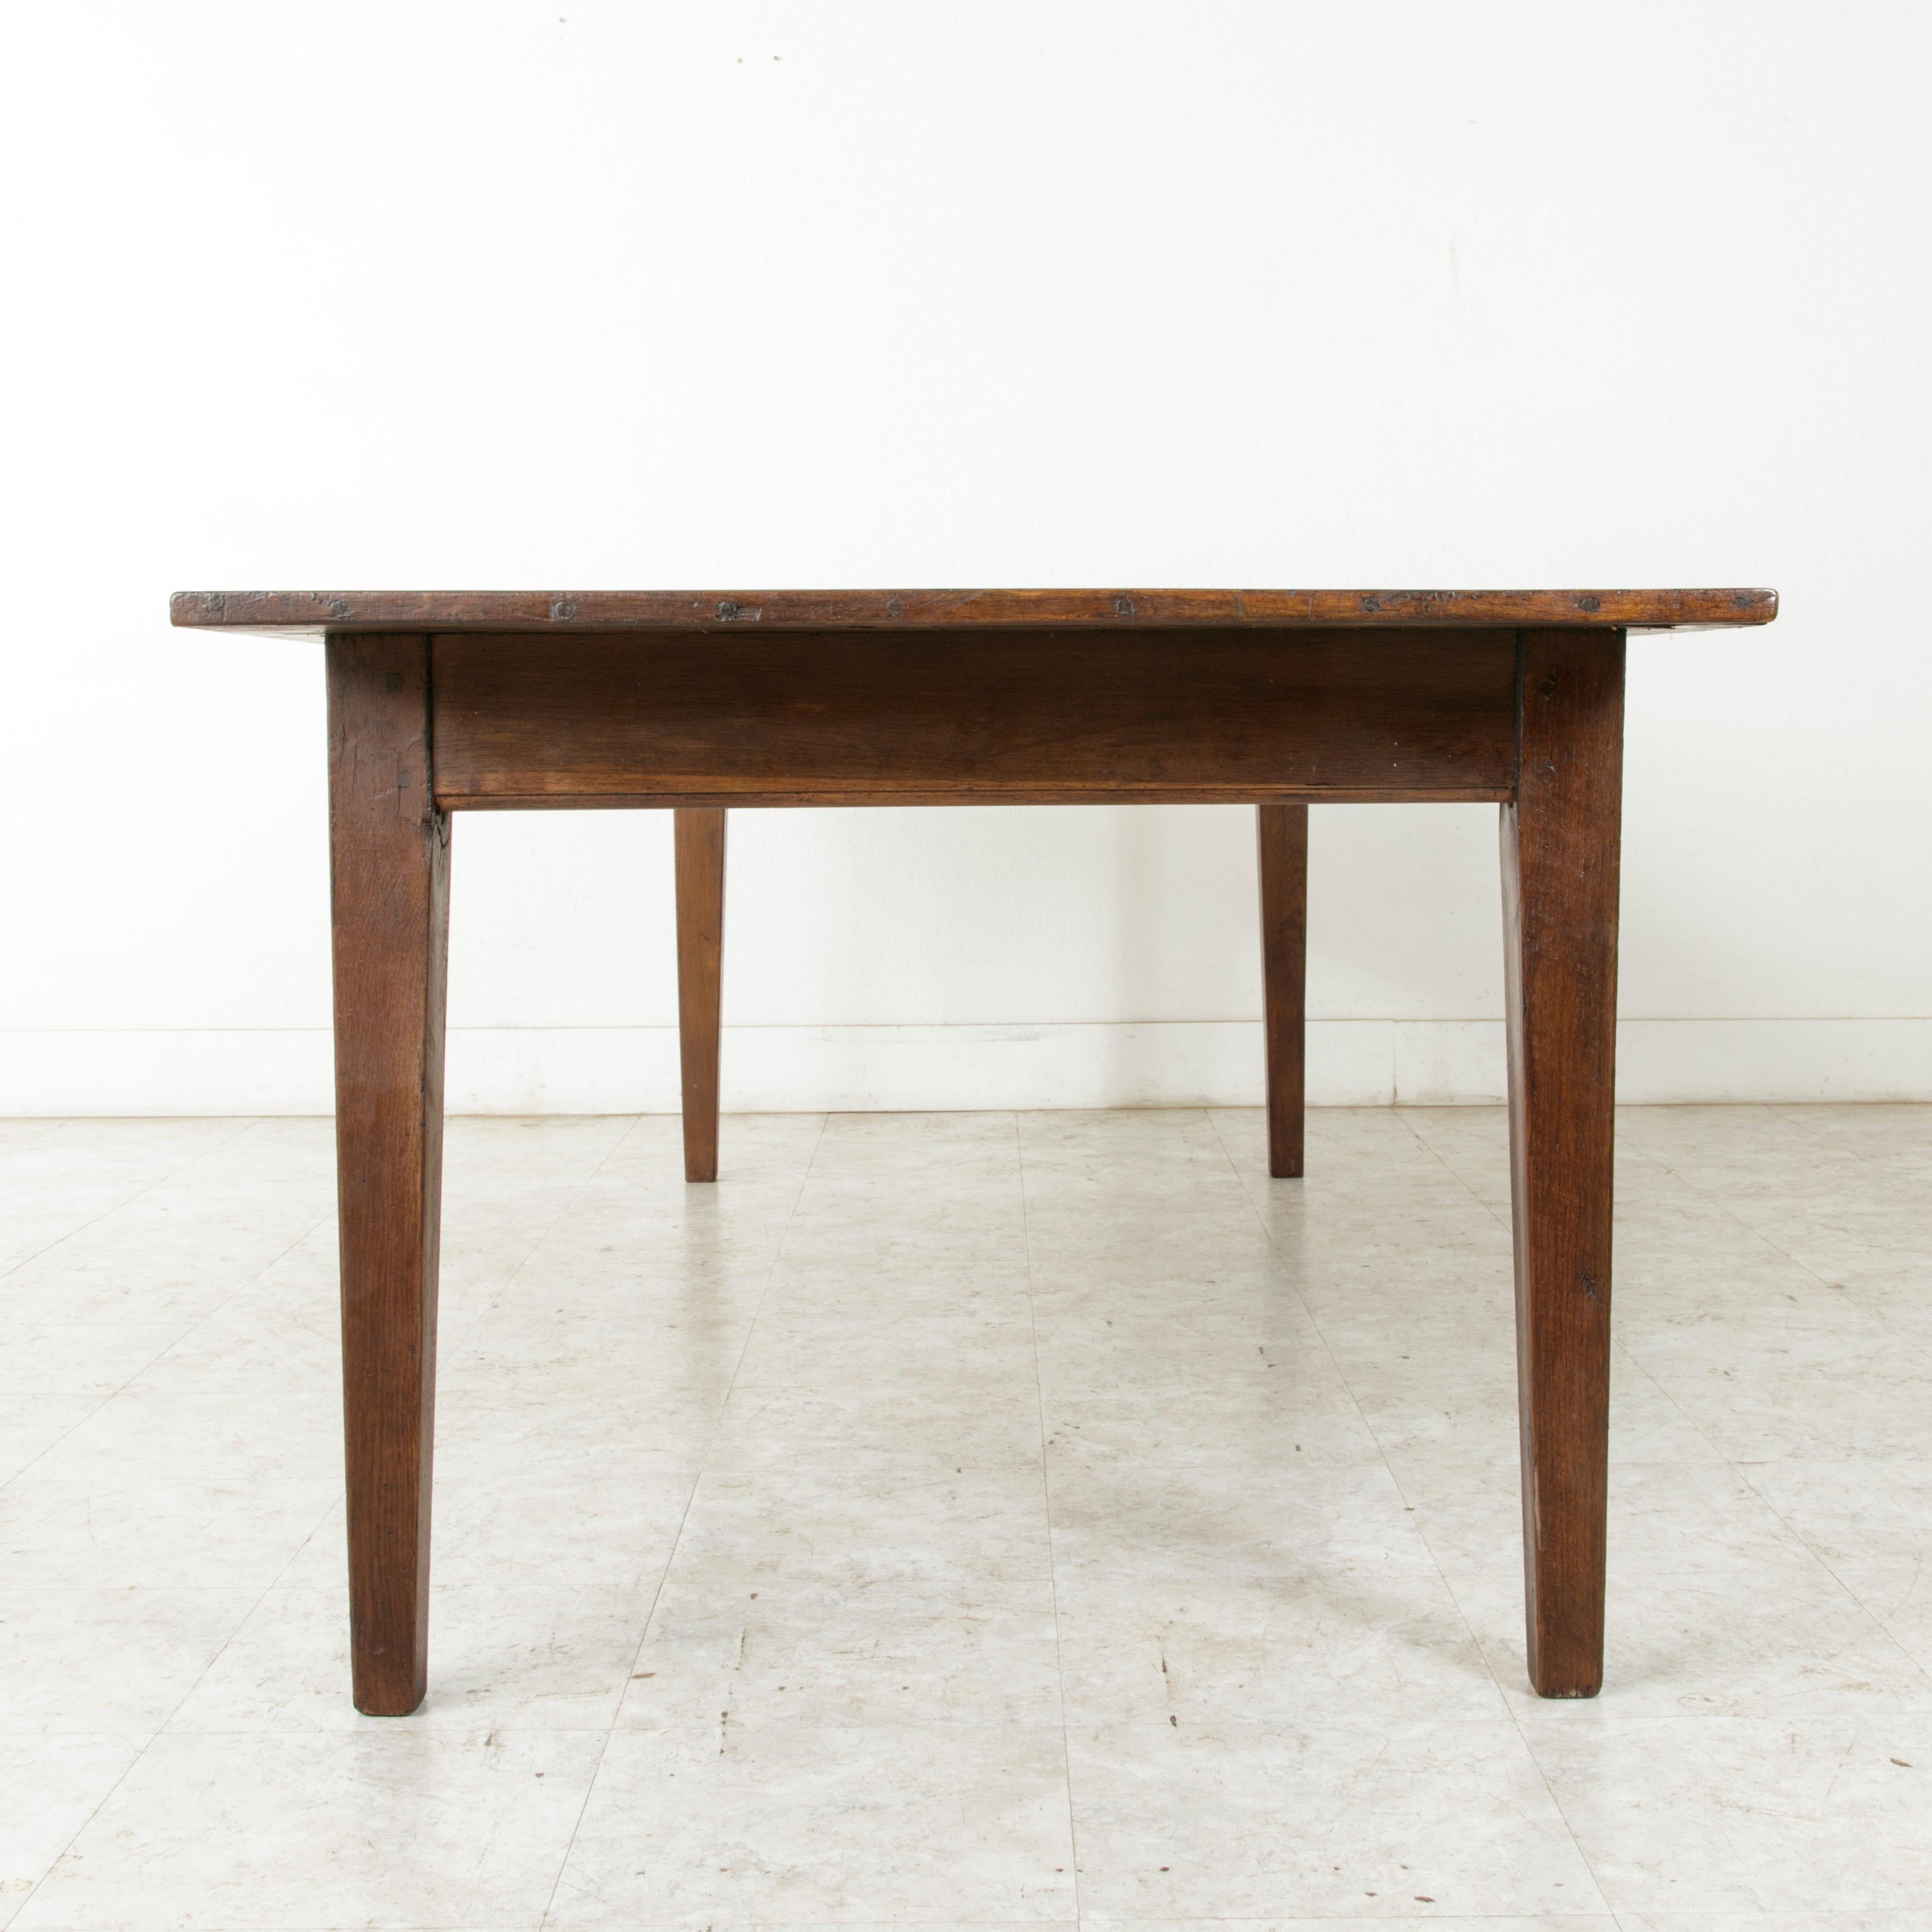 Early 20th Century Long French Oak Farm Table or Dining Table with Two Drawers, circa 1900 